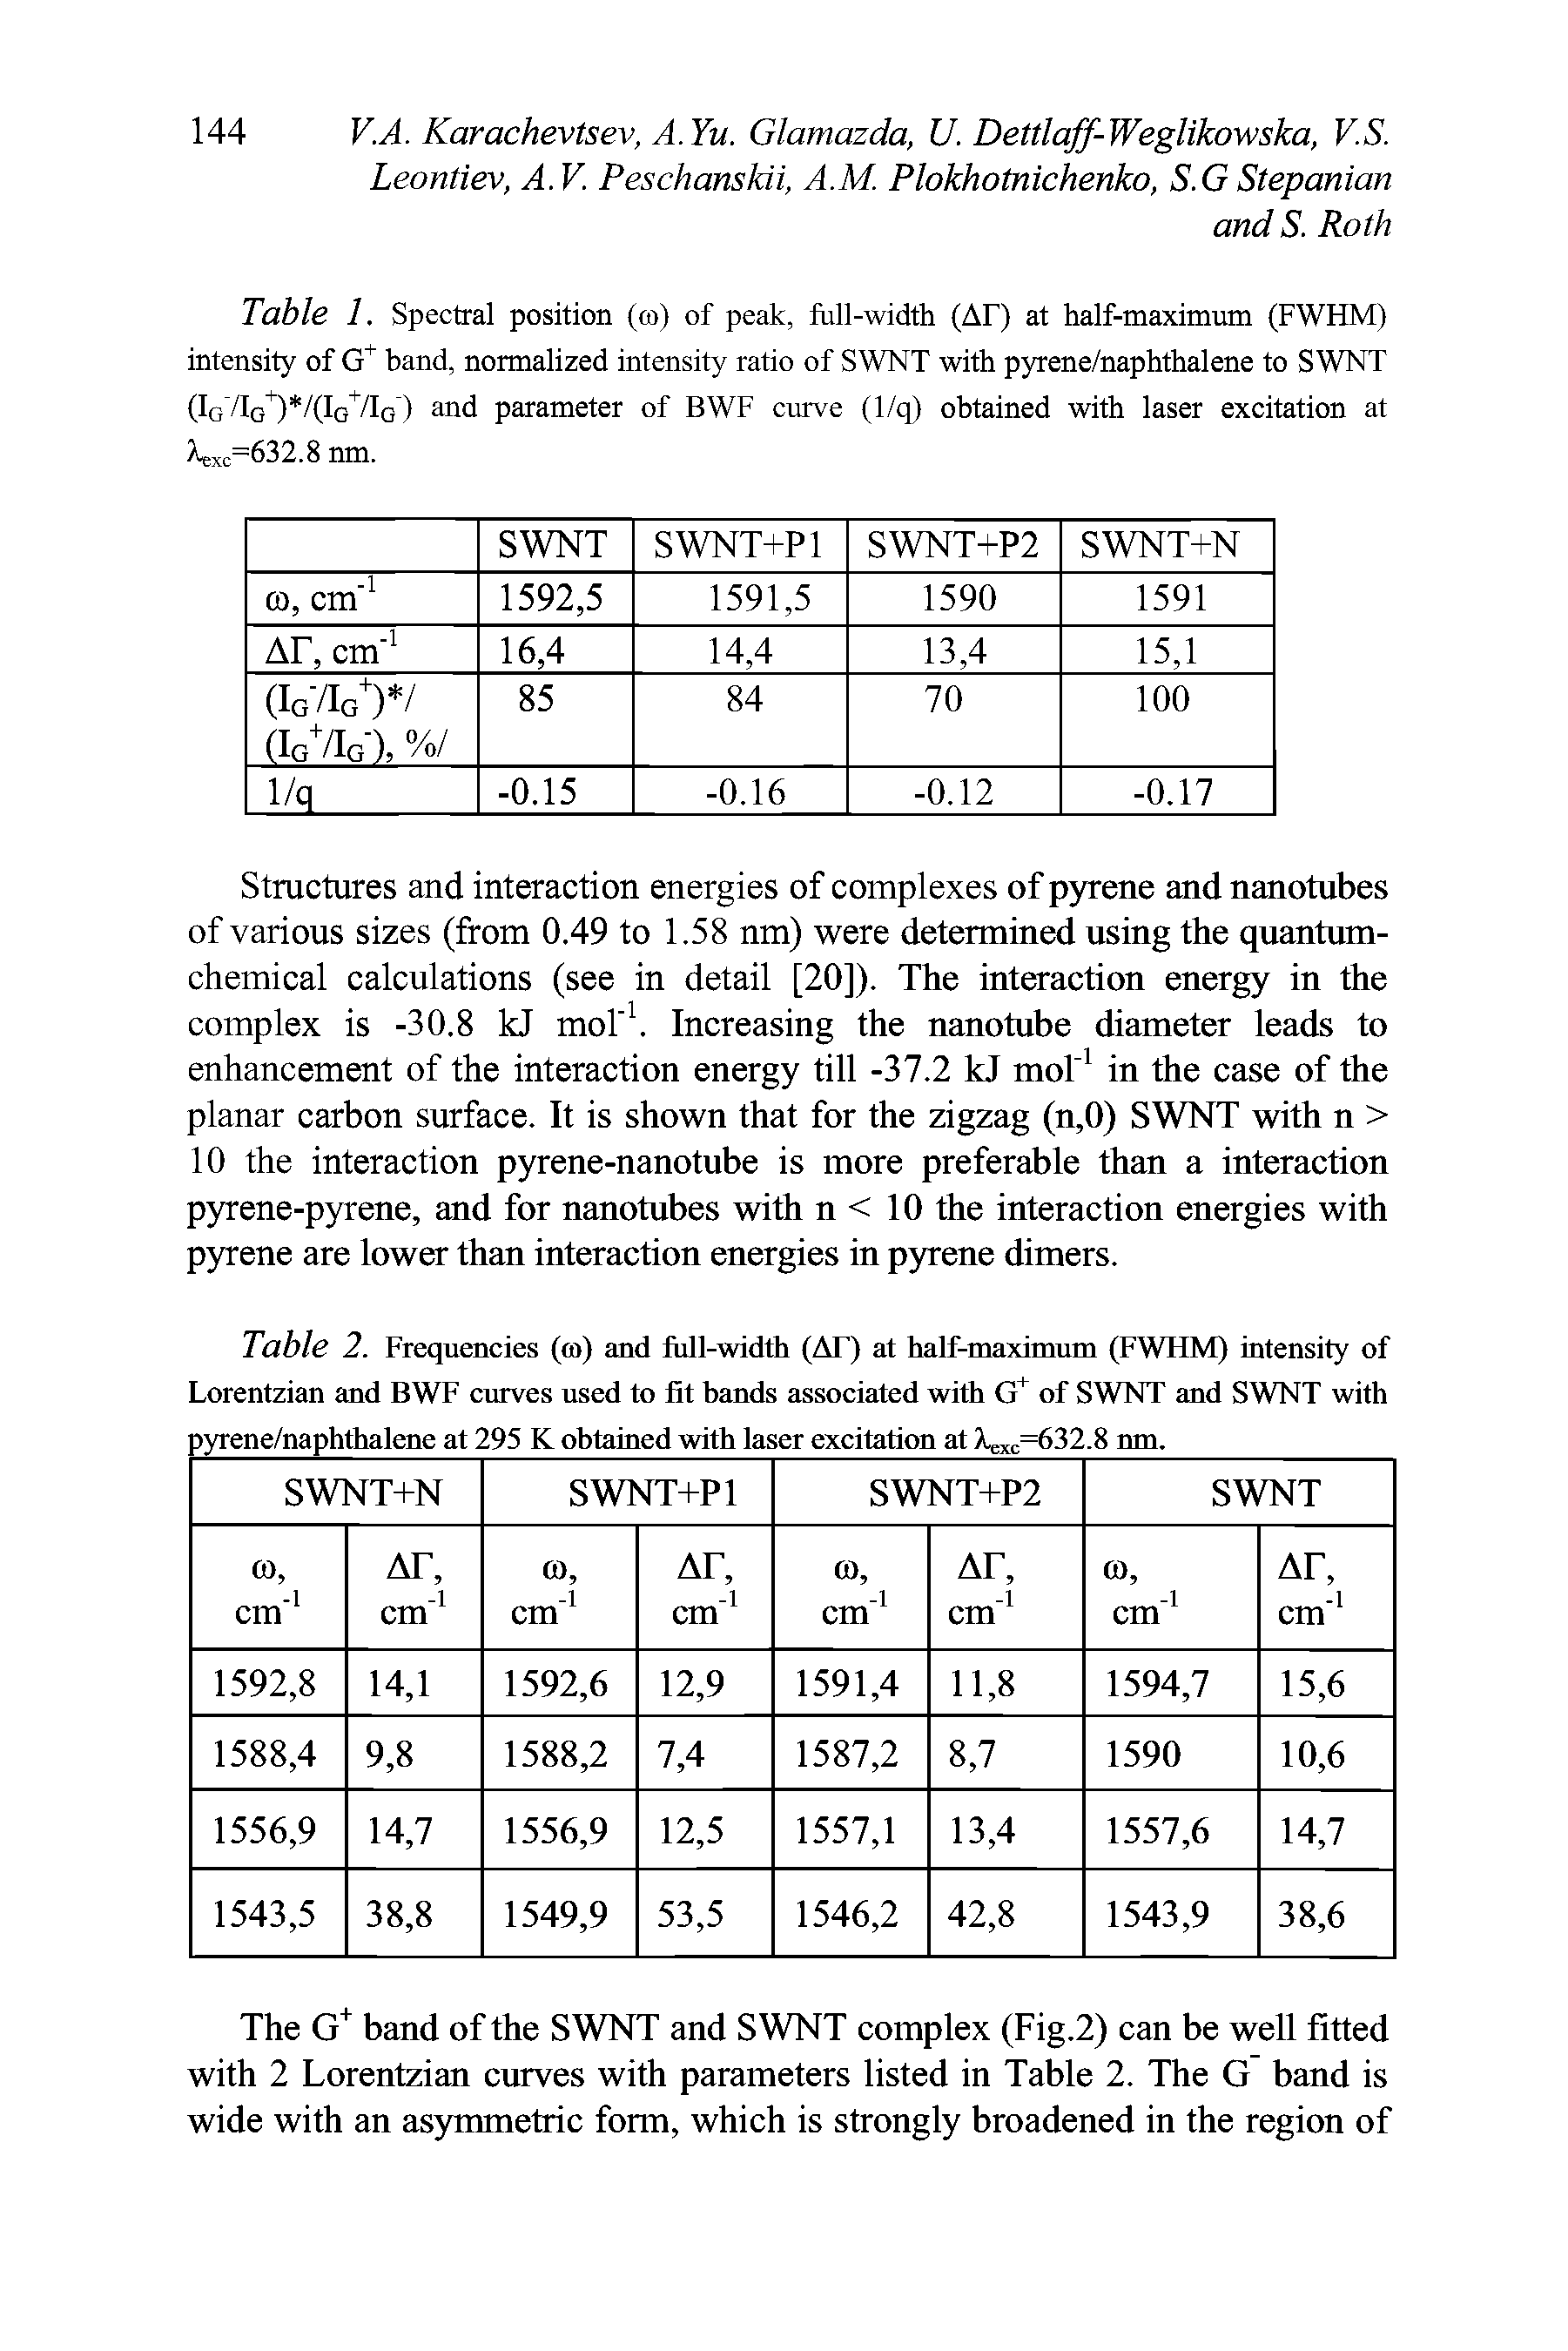 Table 1. Spectral position (co) of peak, full-width (Ar) at half-maximum (FWHM) intensity of G+ band, normalized intensity ratio of SWNT with pyrene/naphthalene to SWNT (IgVIg+) /(Ig+/Ig4 and parameter of BWF curve (1/q) obtained with laser excitation at =632.8 nm.